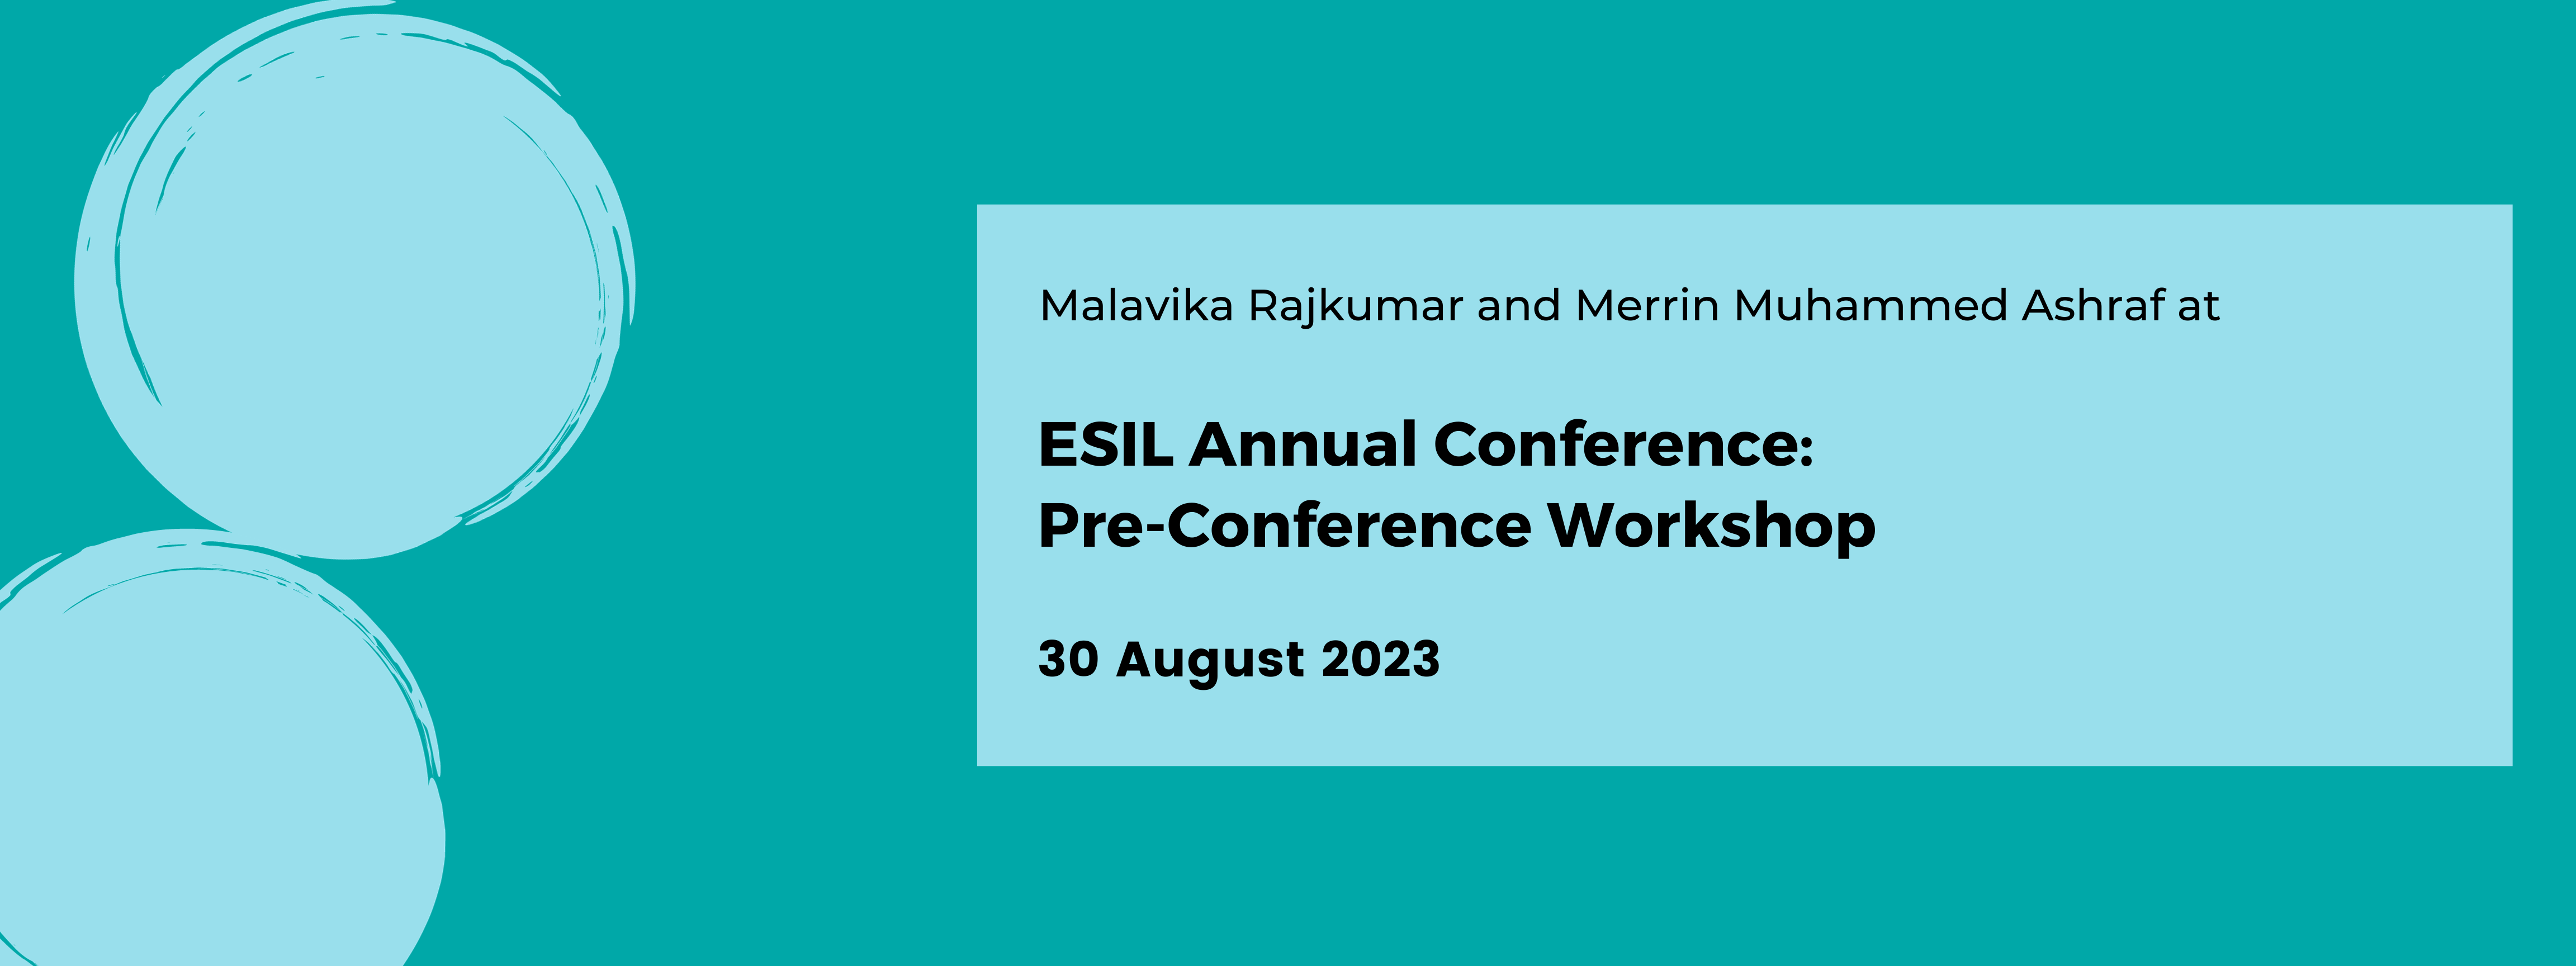 ESIL Annual Conference:  Pre-Conference Workshop 